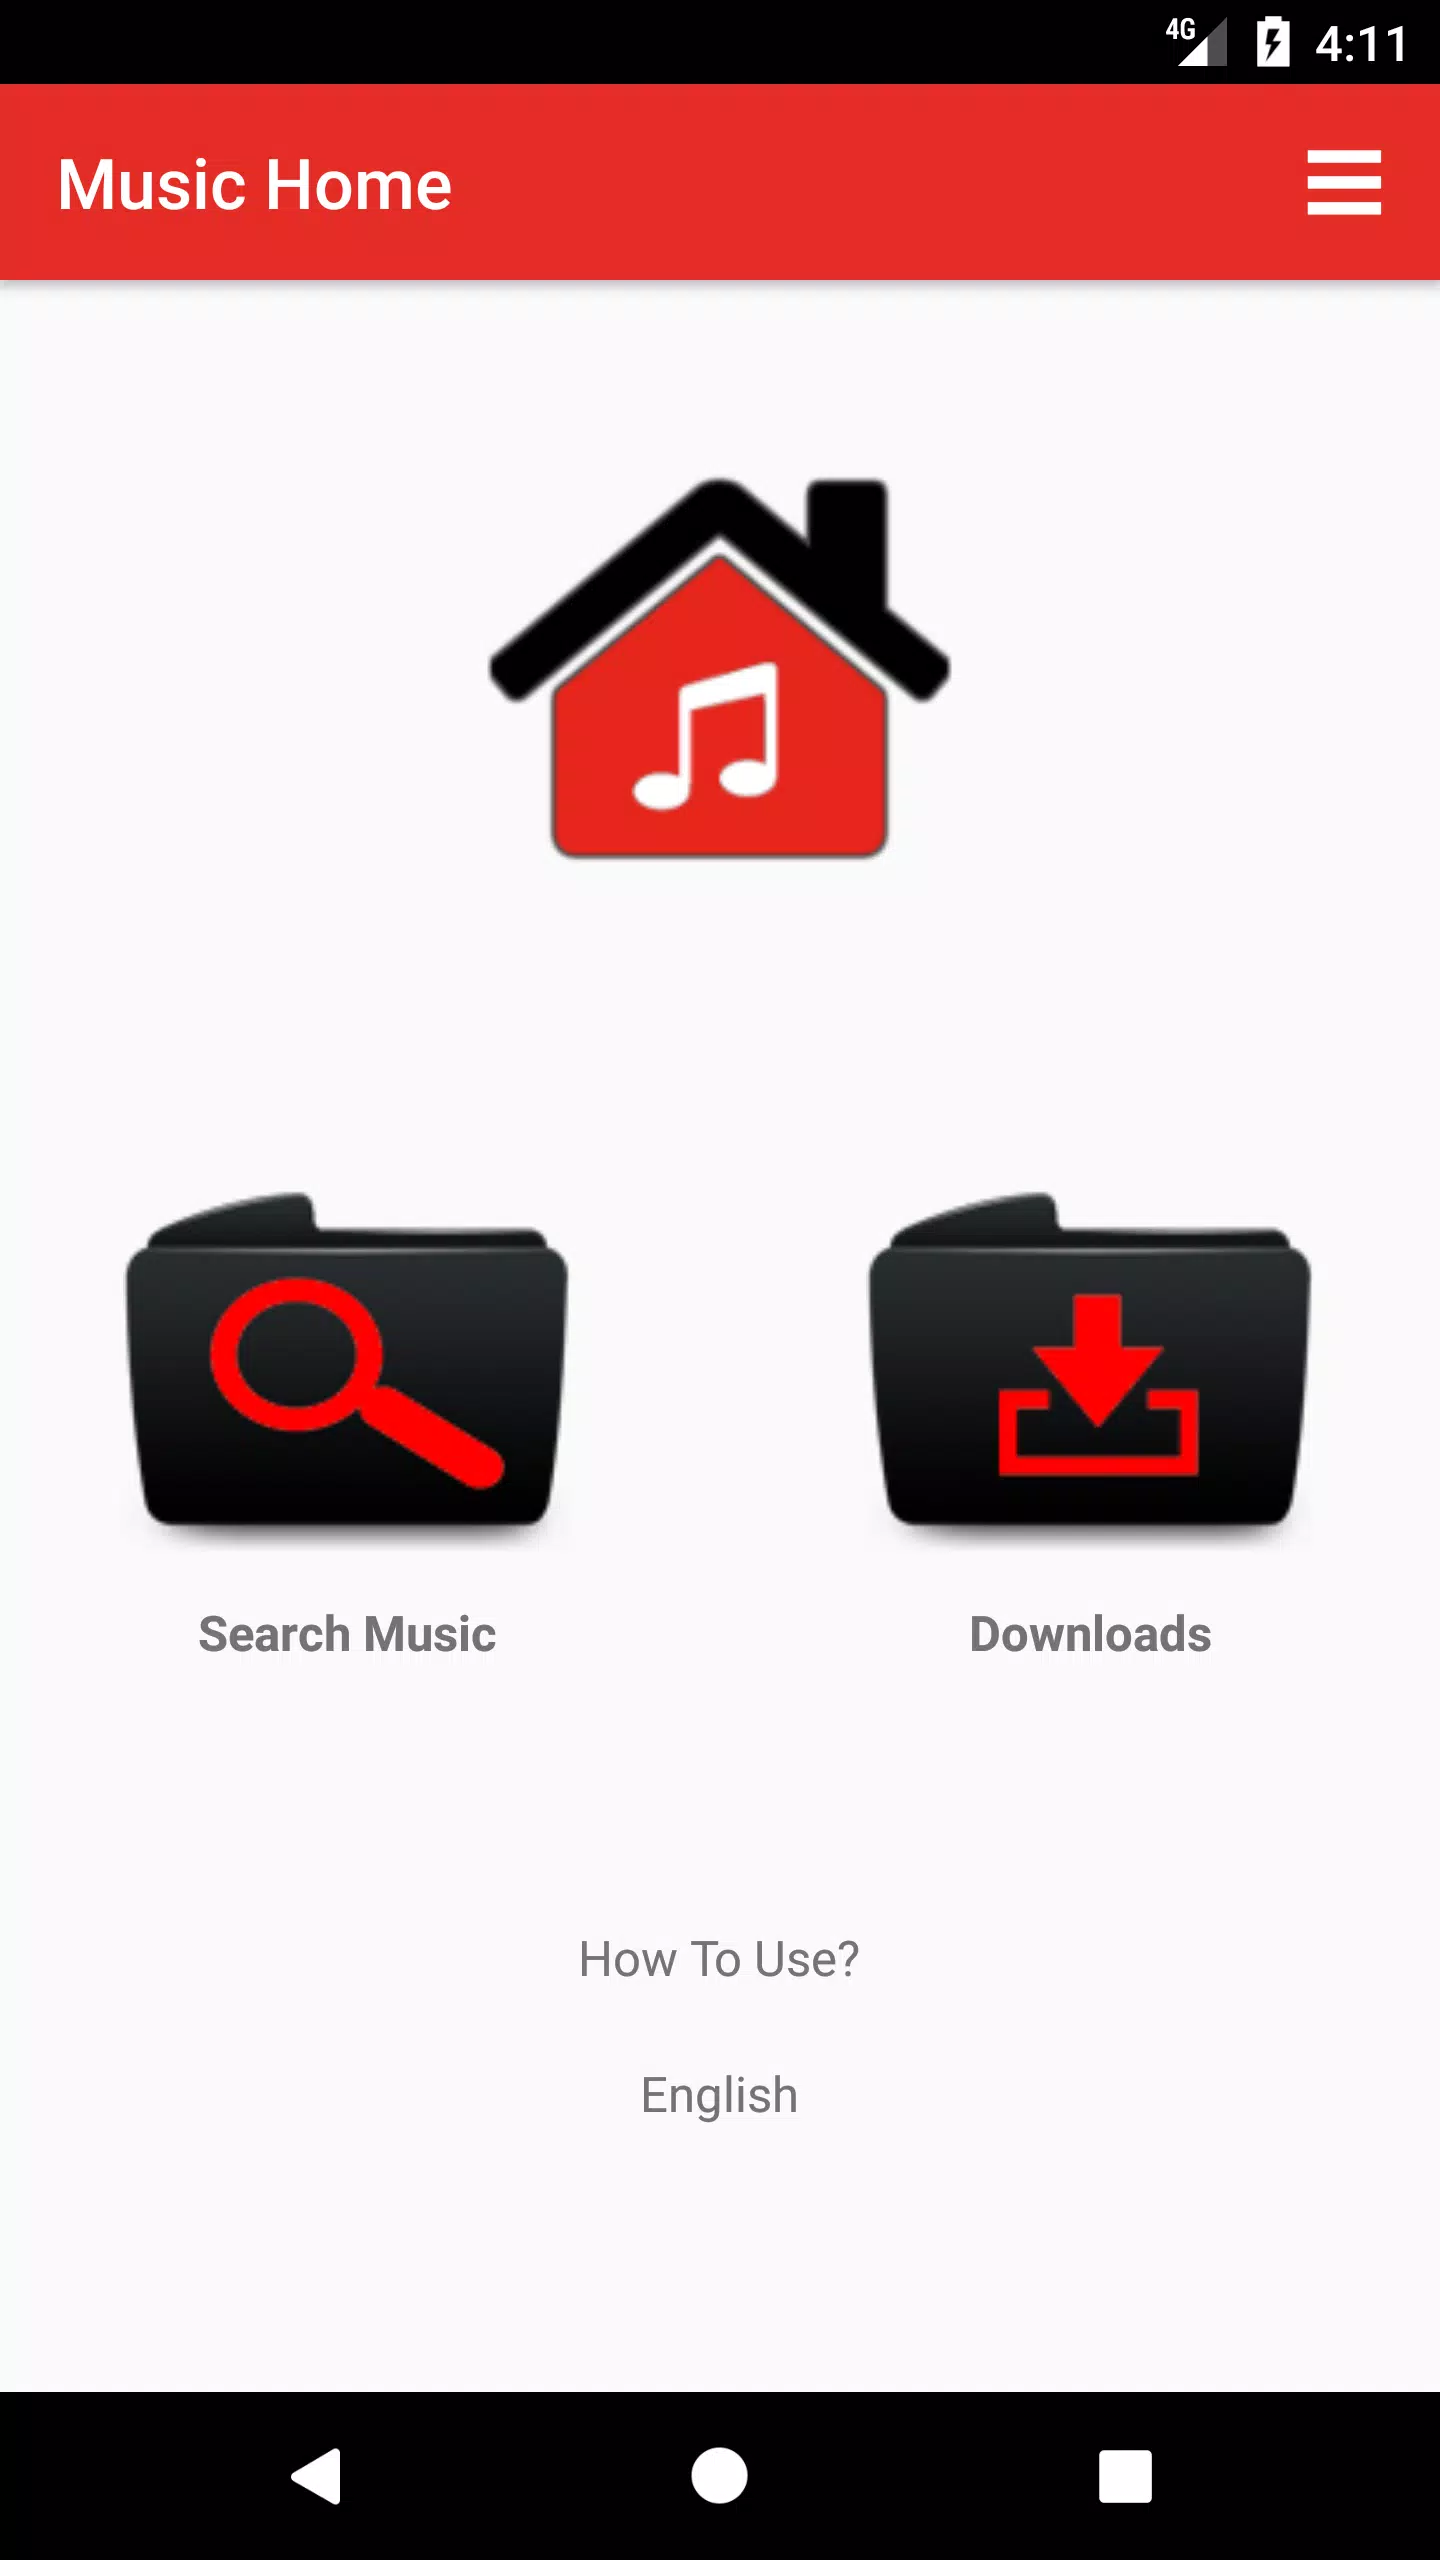 Music Home free mp3 music downloader APK pour Android Télécharger